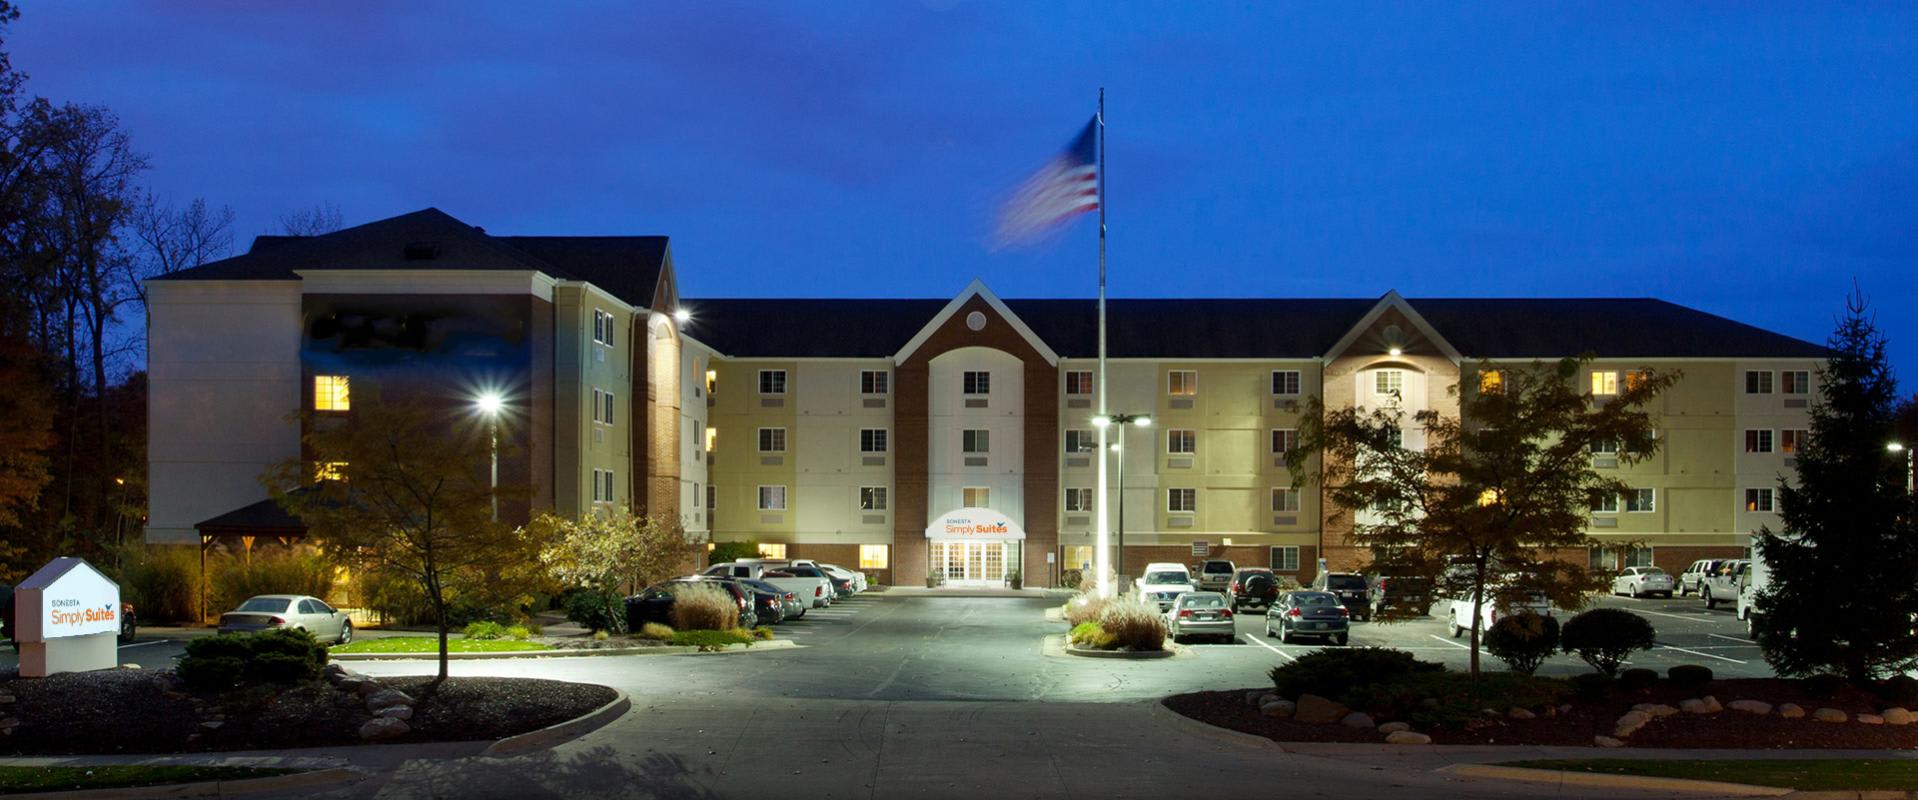 Simply Suites Cleveland North Olmsted Airport Hotel Exterior